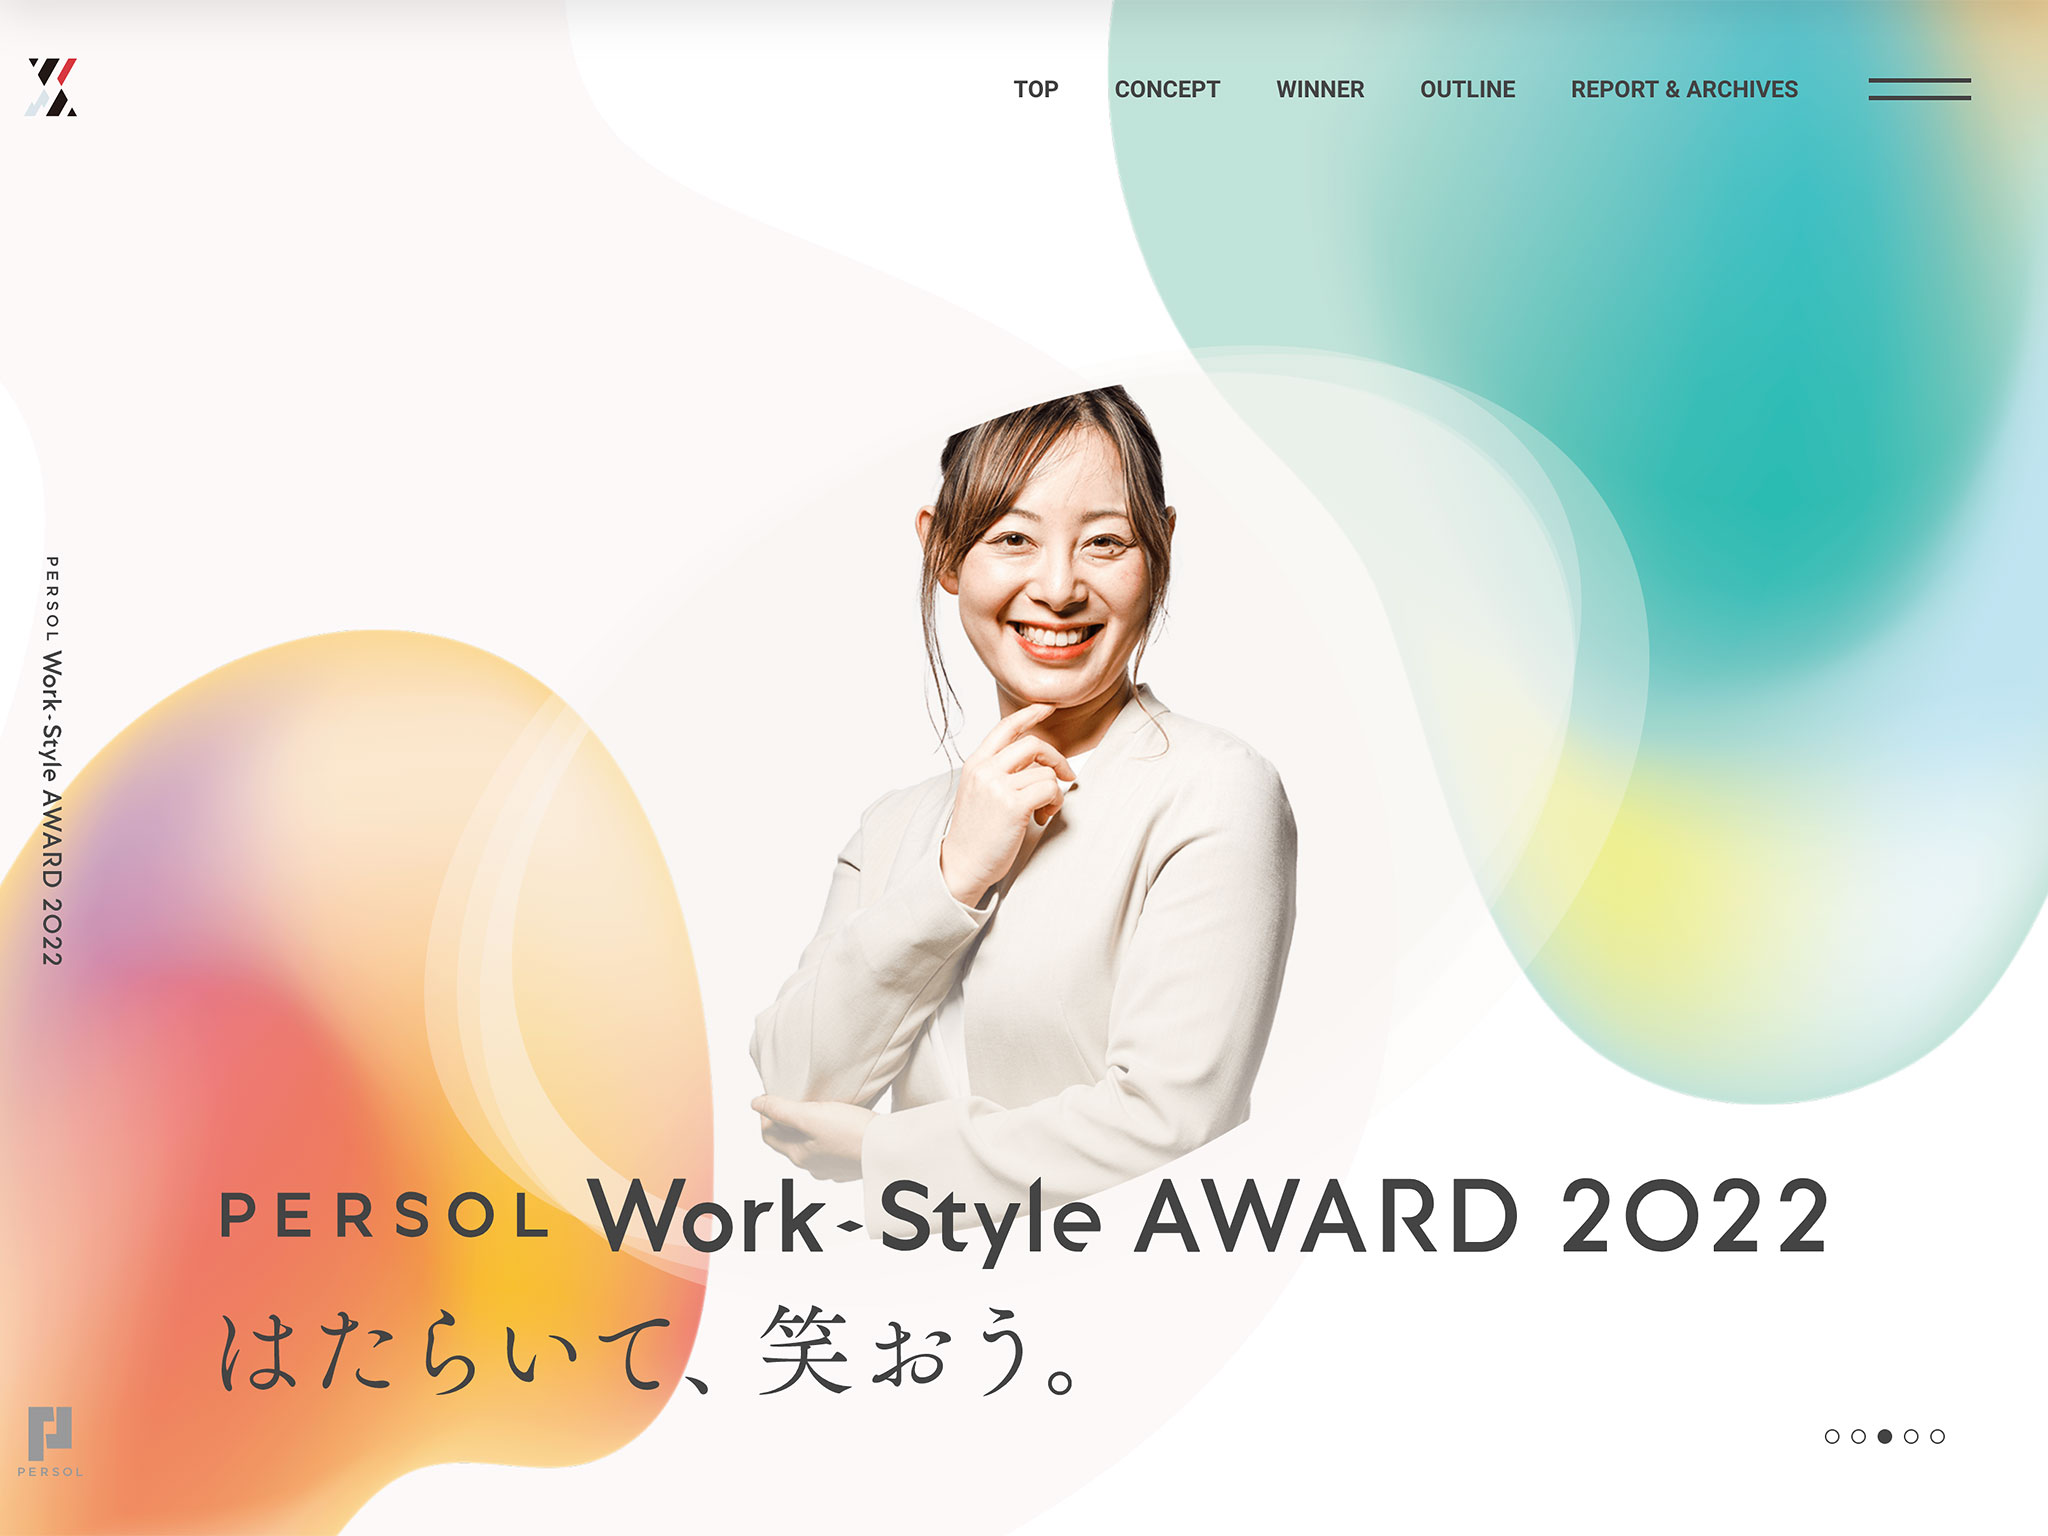 PERSOL Work-Style AWARD 2022 はたらいて、笑おう。| PERSOL（パーソル）グループ